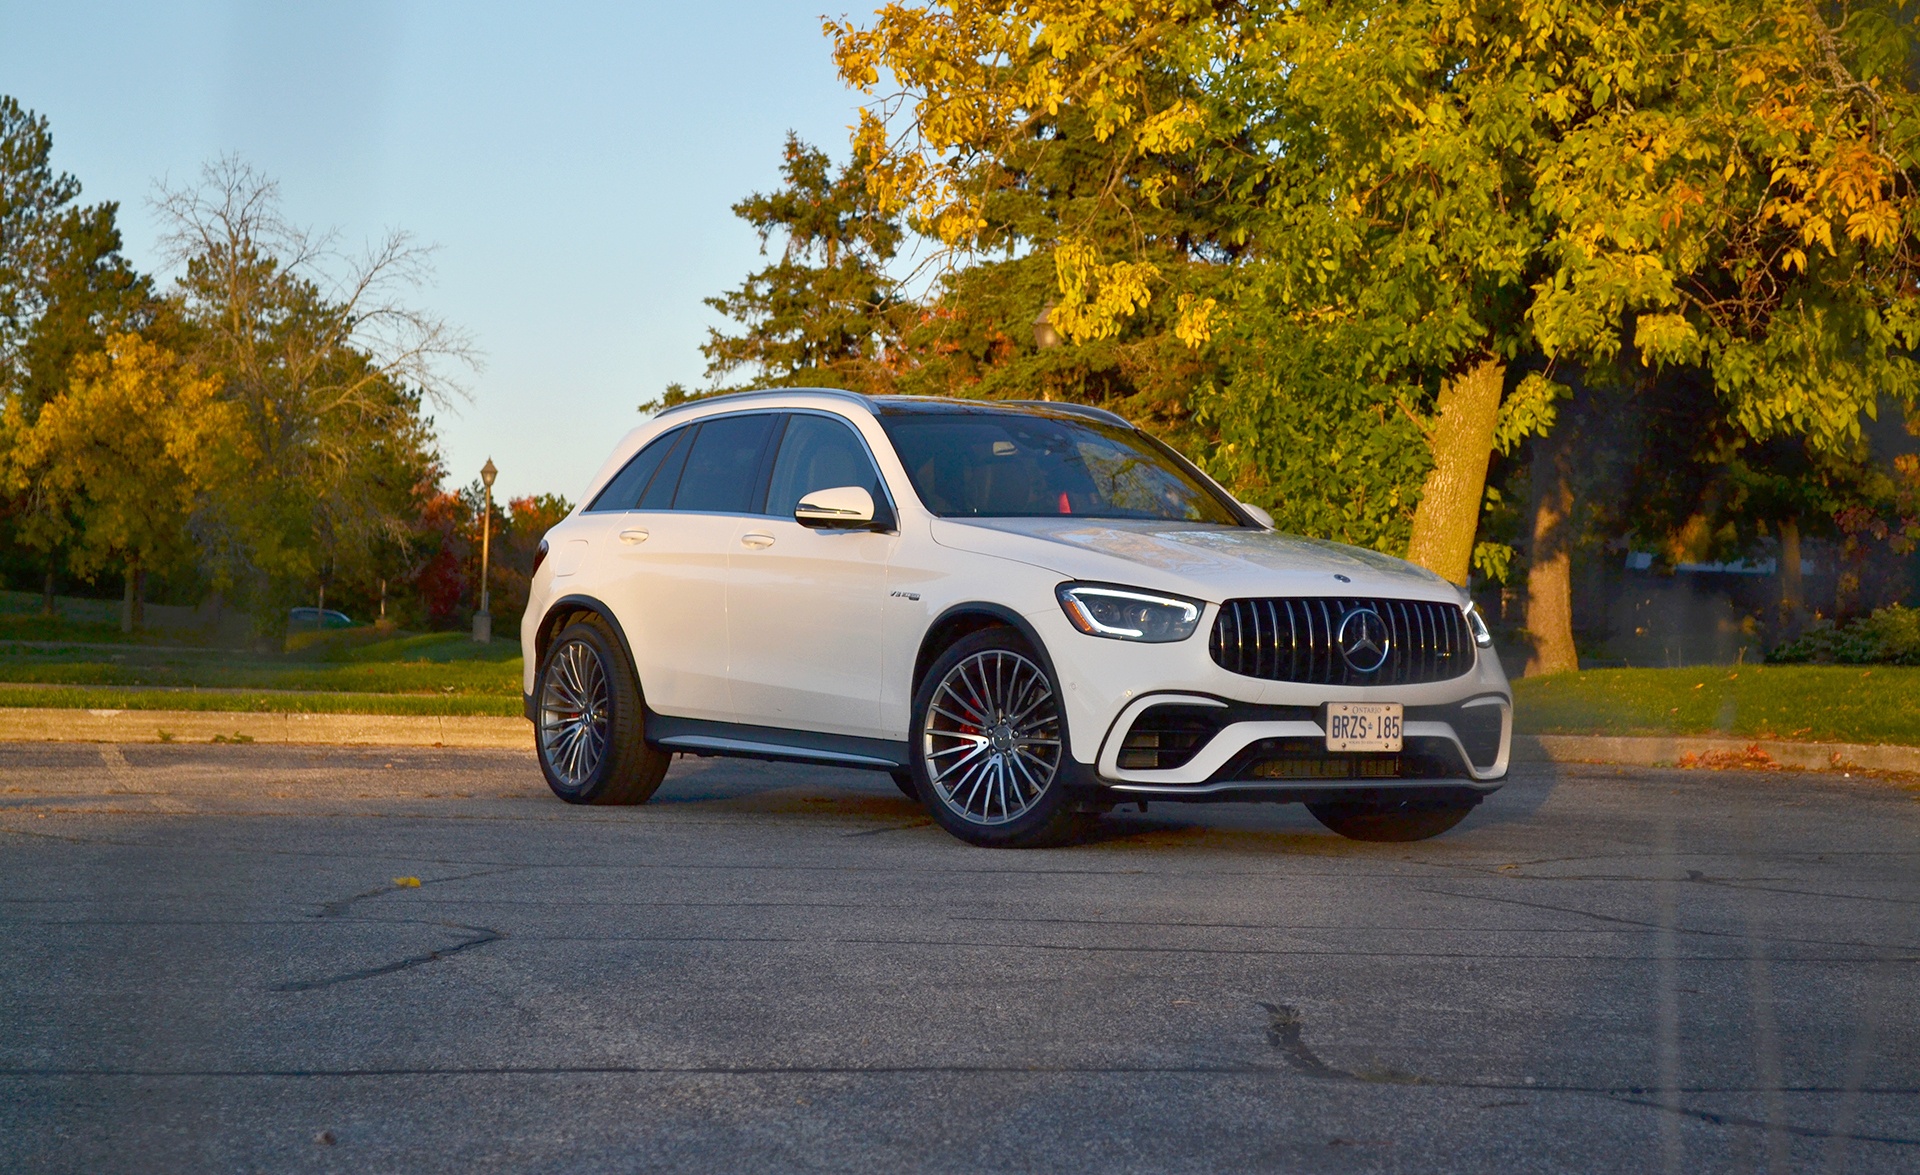 2020 Mercedes-AMG GLC 63 S Review: Muscle Utility Vehicle - AutoGuide.com